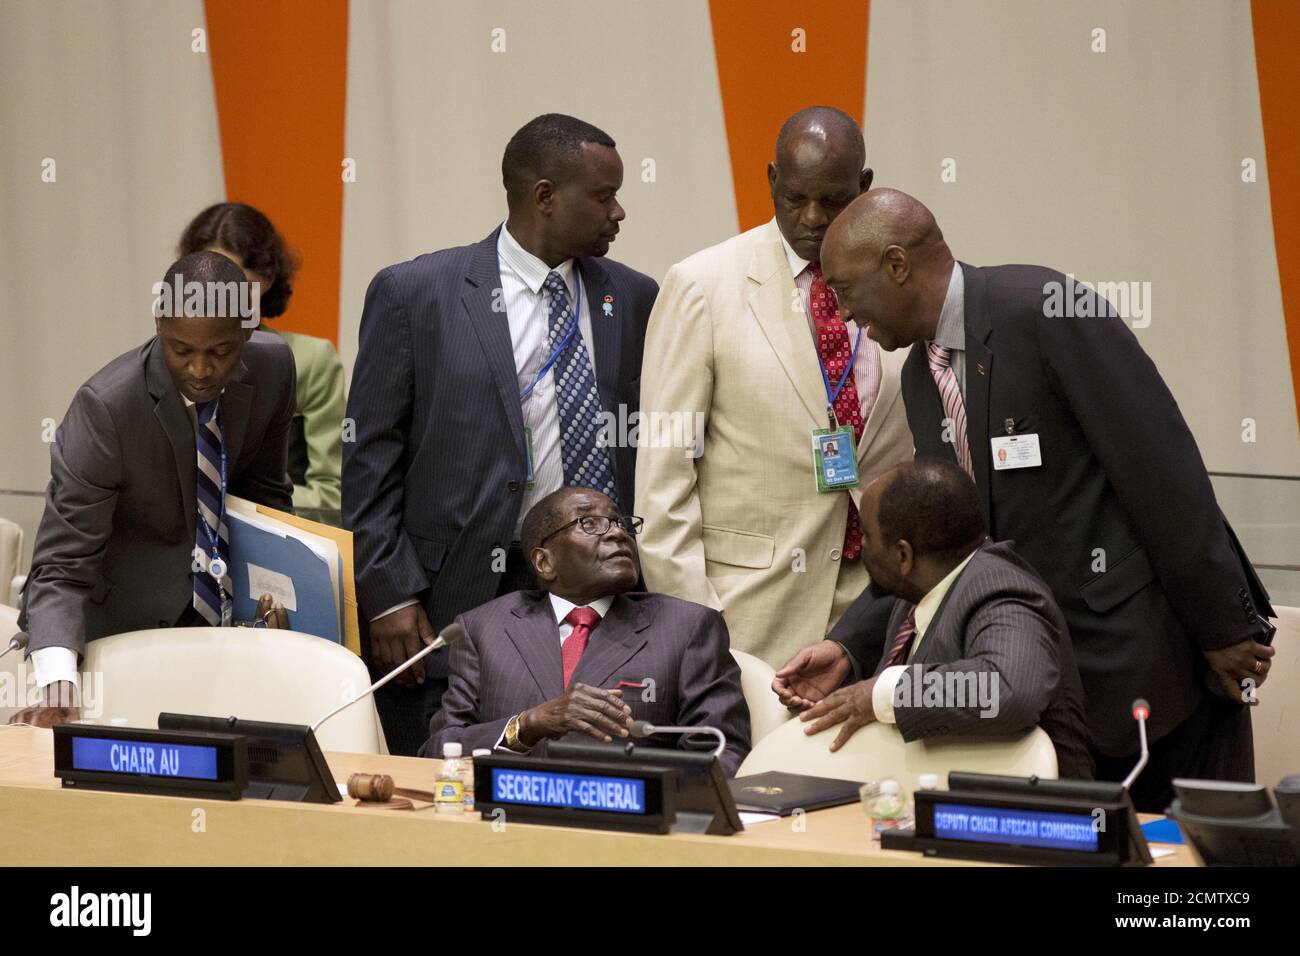 Zimbabwe's President Robert Mugabe greets other attendees before the sixth high-level meeting of the Regional Oversight Mechanism of the Peace, Security and Cooperation Framework for the Democratic Republic of the Congo and the Region, during the United Nations General Assembly at the United Nations Headquarters in Manhattan, New York September 29, 2015.  REUTERS/Andrew Kelly      TPX IMAGES OF THE DAY Stock Photo